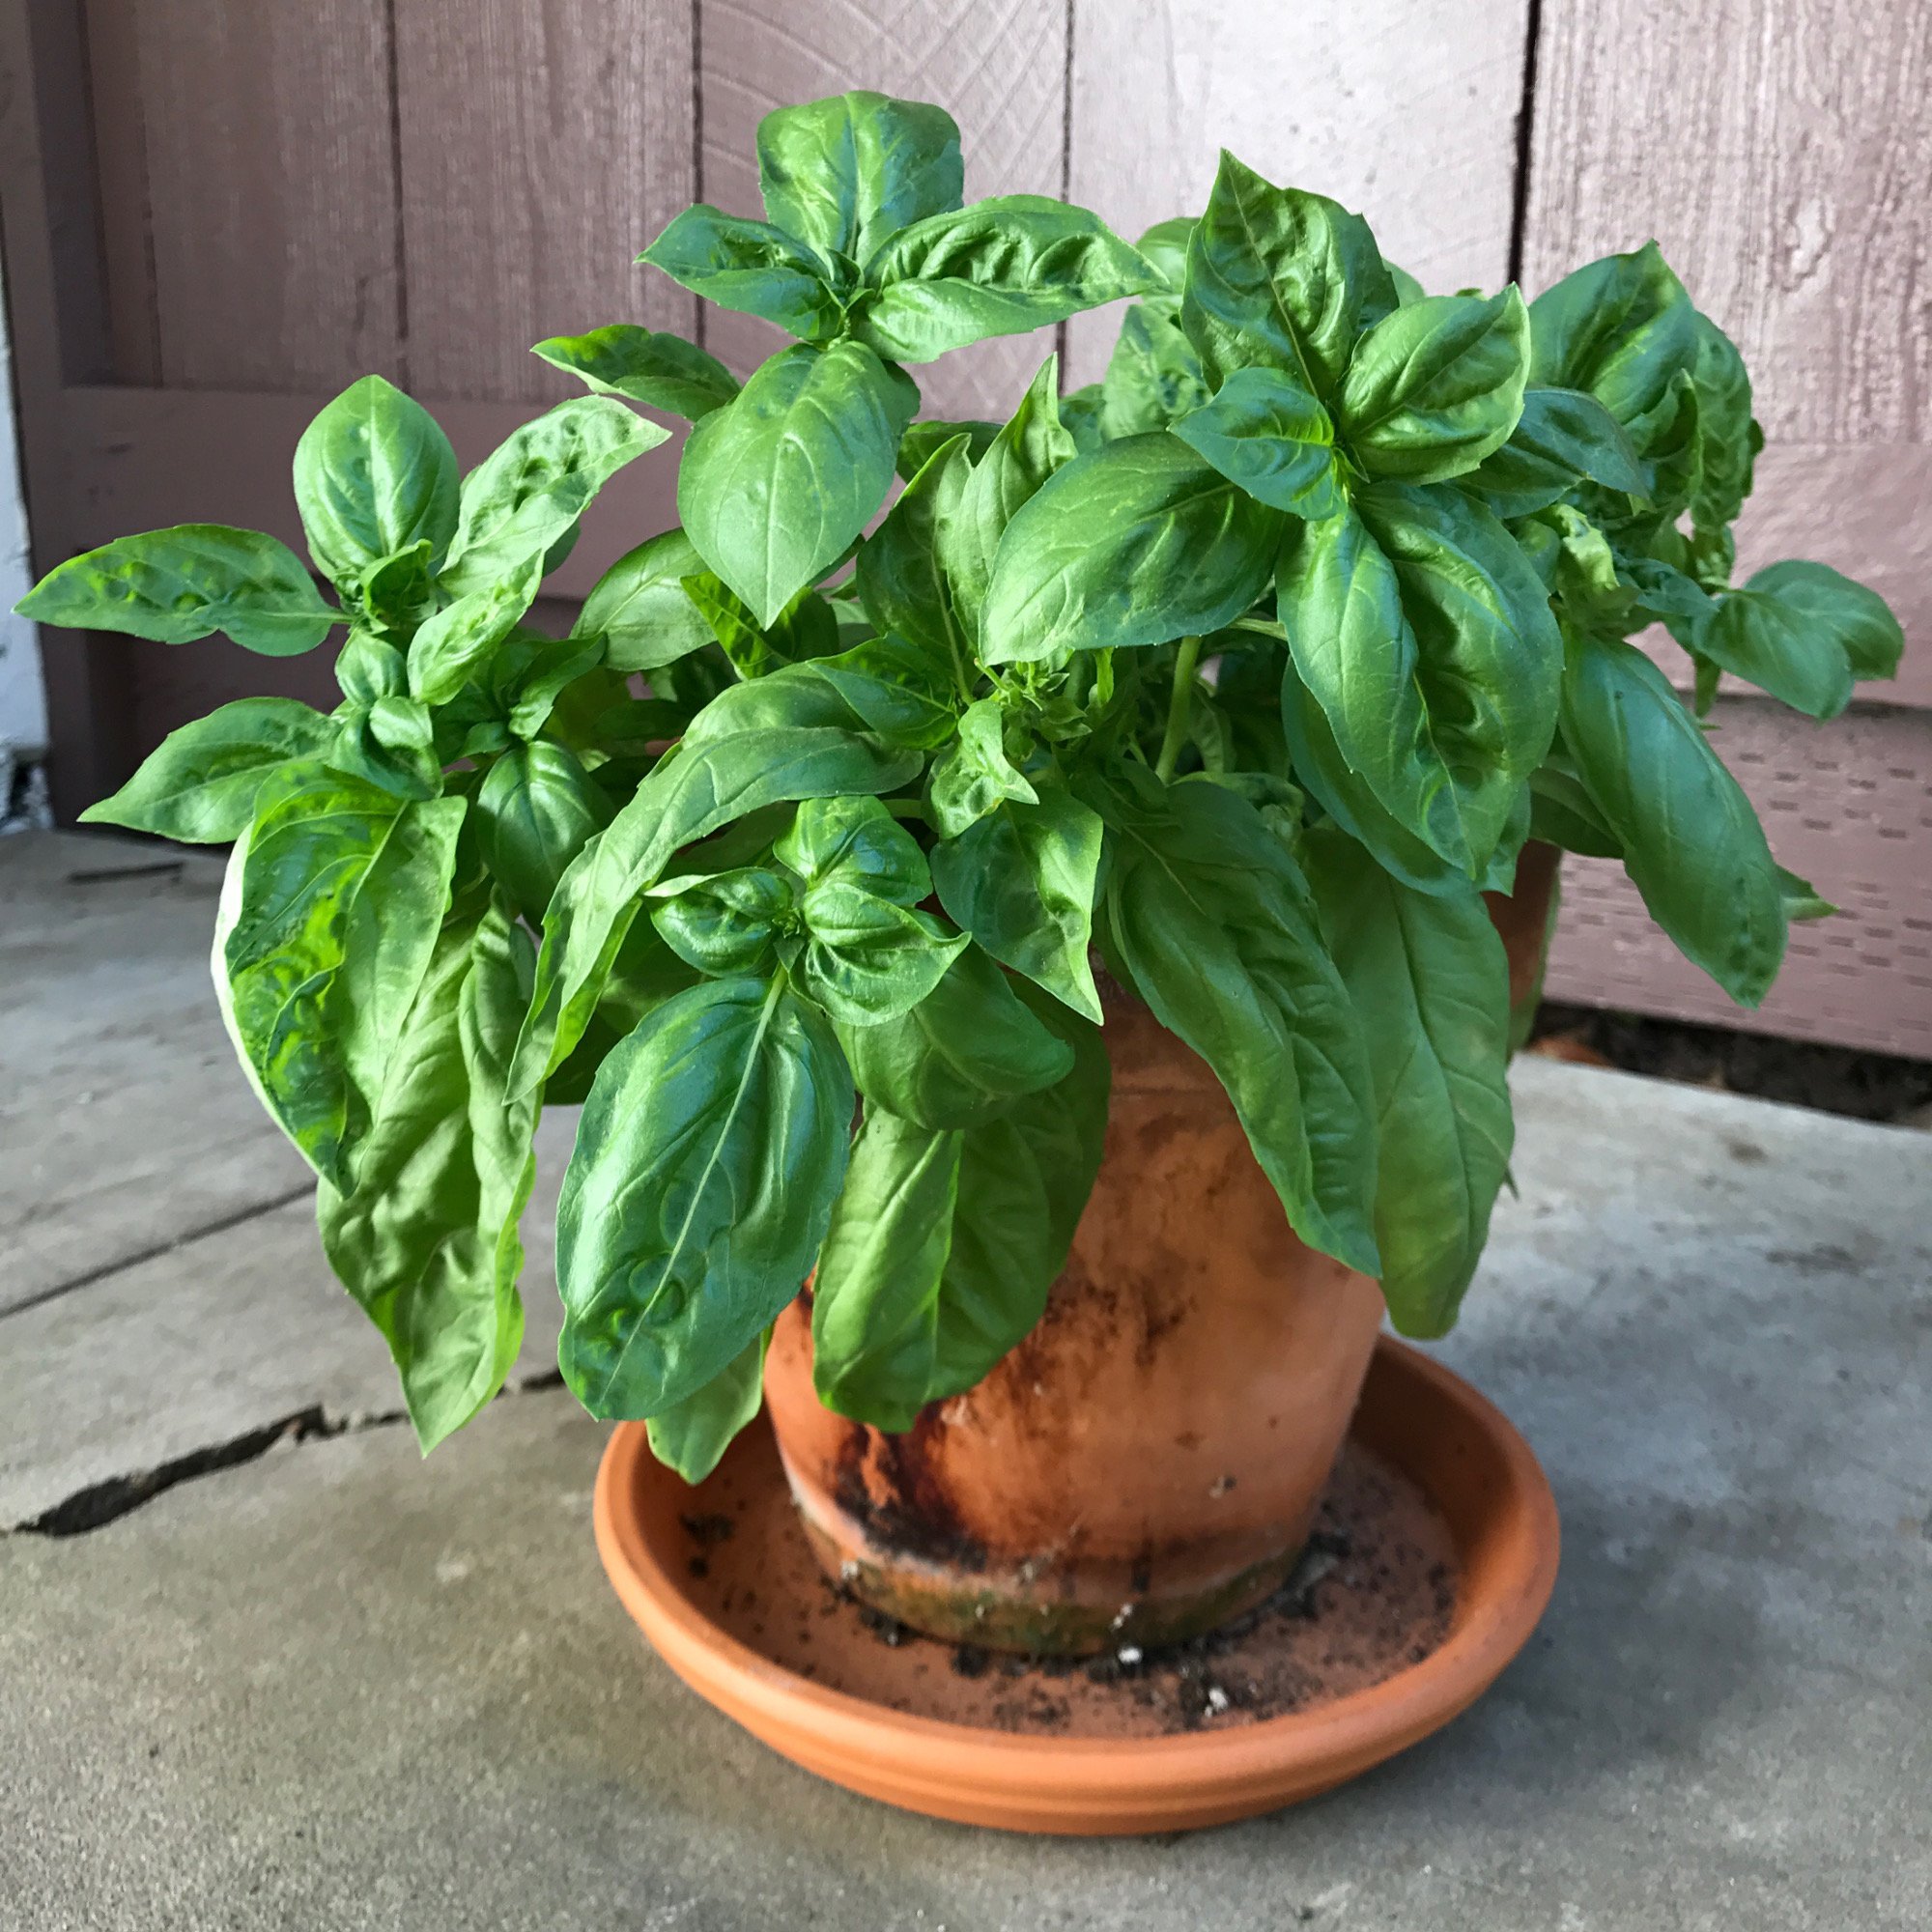 How to Grow Free Basil from Cuttings